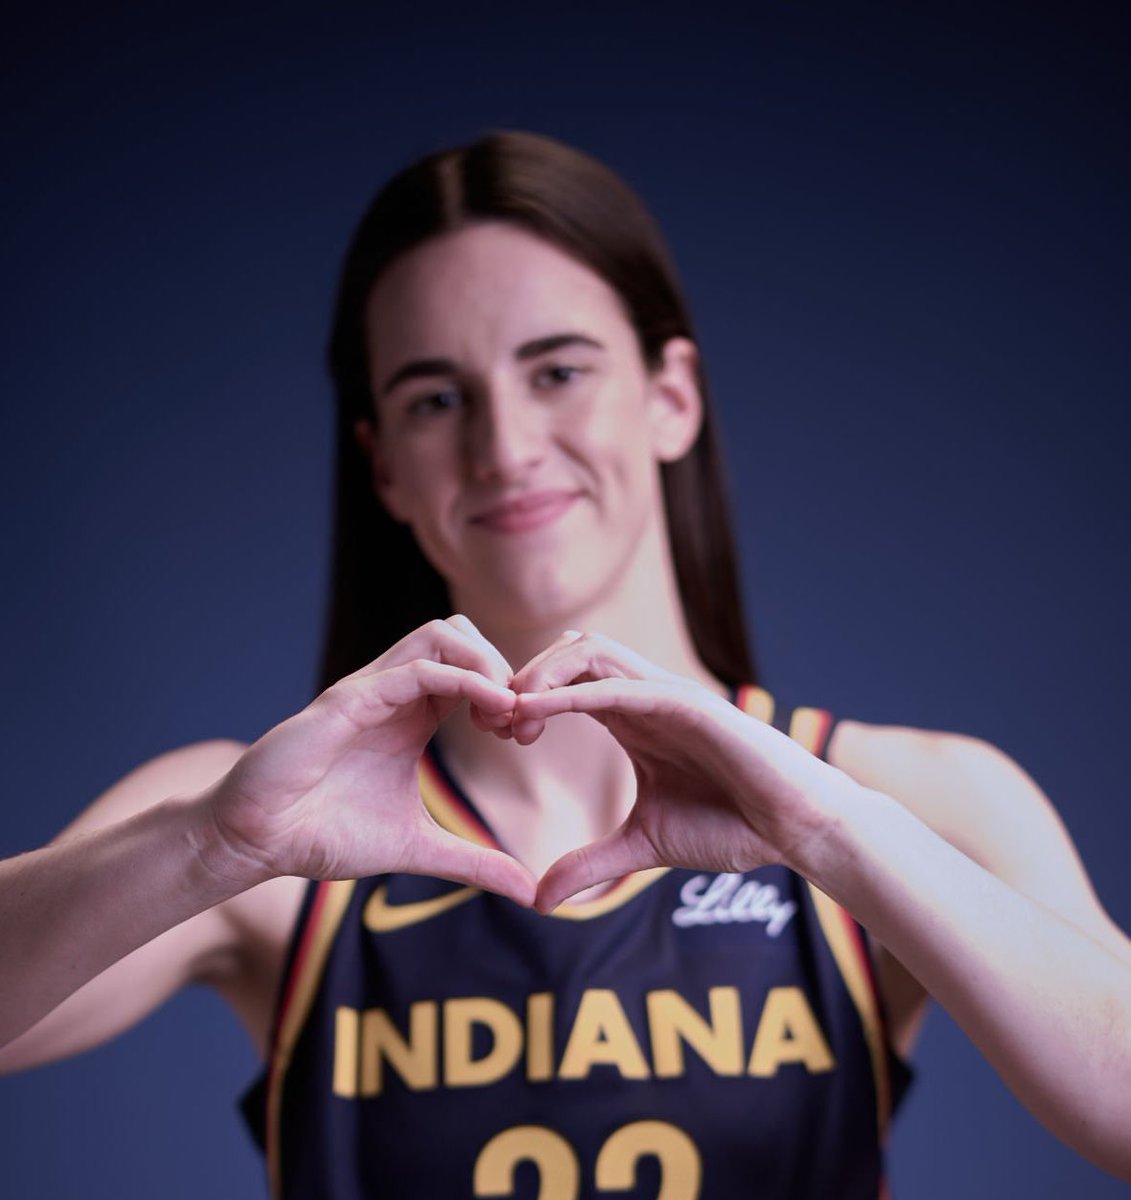 Caitlin Clark’s WNBA Debut just started and she’s already breaking records. The average ticket price on @TickPick tonight is $108. The average purchase price for a WNBA game last season was $47. Caitlin Clark's preseason debut is 2x more expensive. 📈 #WNBA